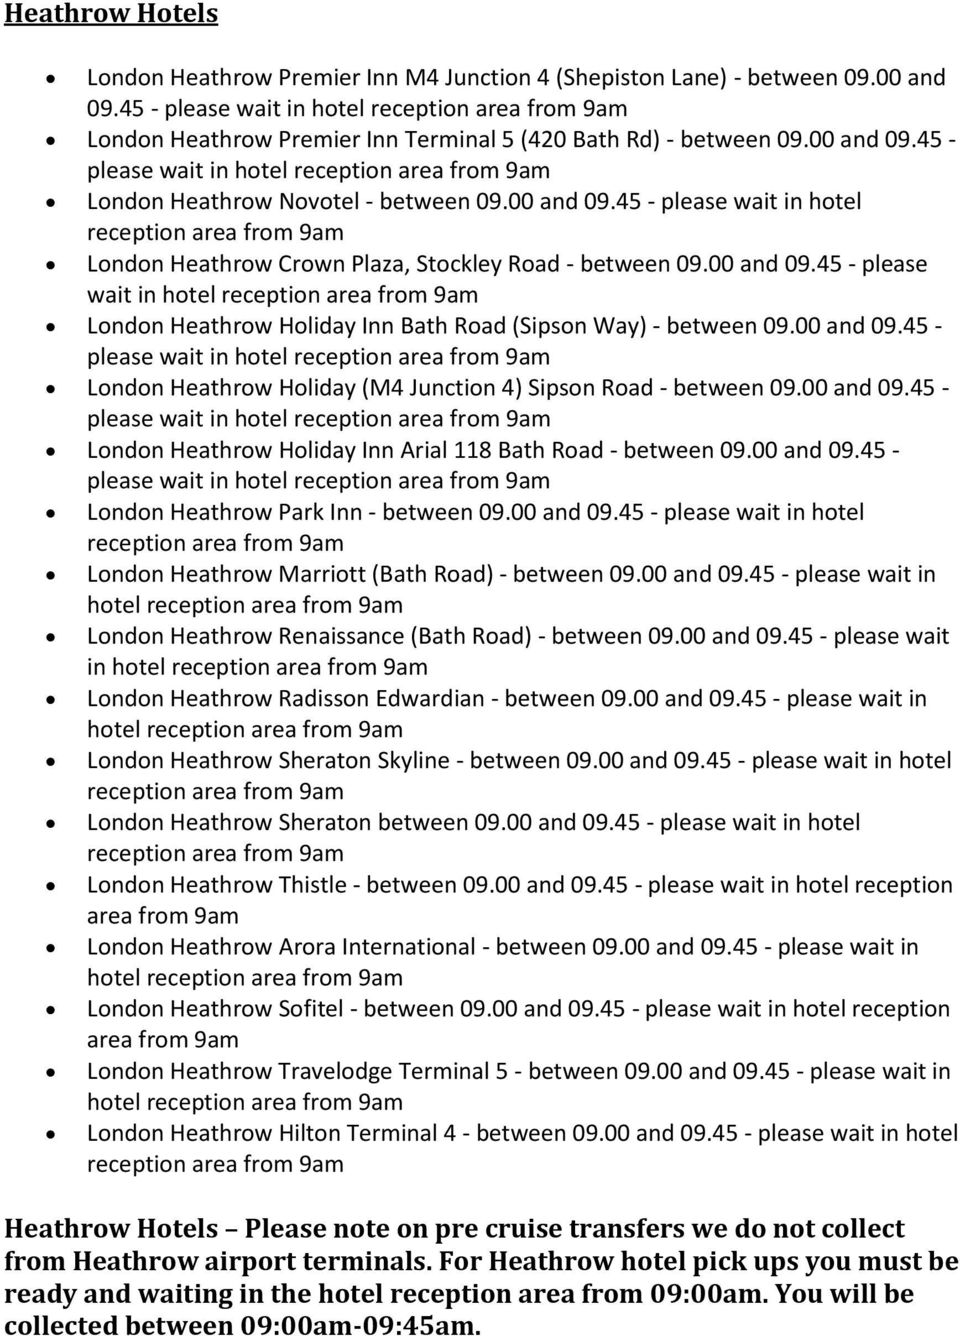 00 and 09.45 - please wait in hotel London Heathrow Holiday (M4 Junction 4) Sipson Road - between 09.00 and 09.45 - please wait in hotel London Heathrow Holiday Inn Arial 118 Bath Road - between 09.